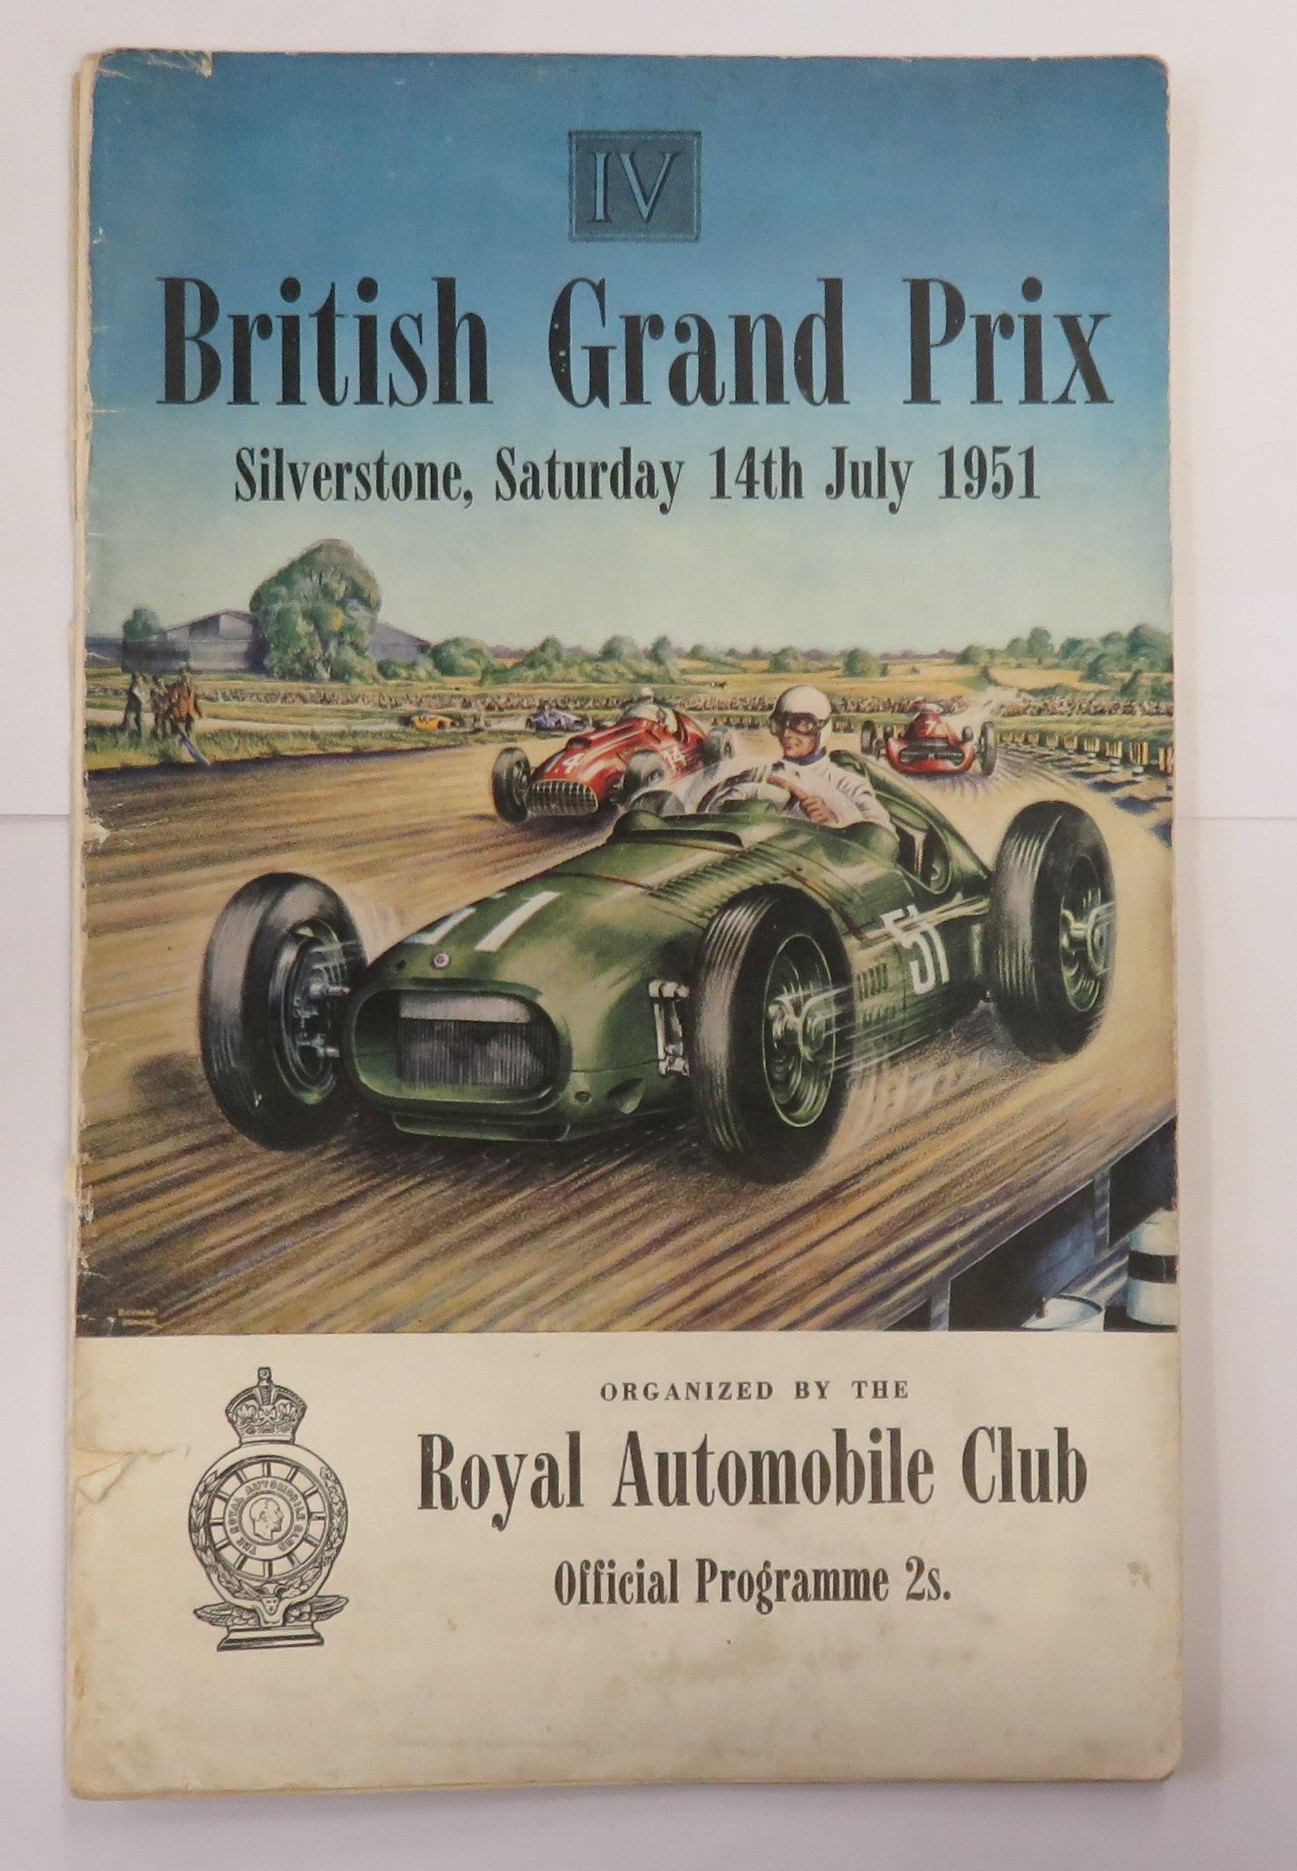 Programme Of The 4th British Grand Prix And The R.A.C. Internatinal 500 c.c. Race Silverstone Saturday 14th July 1951